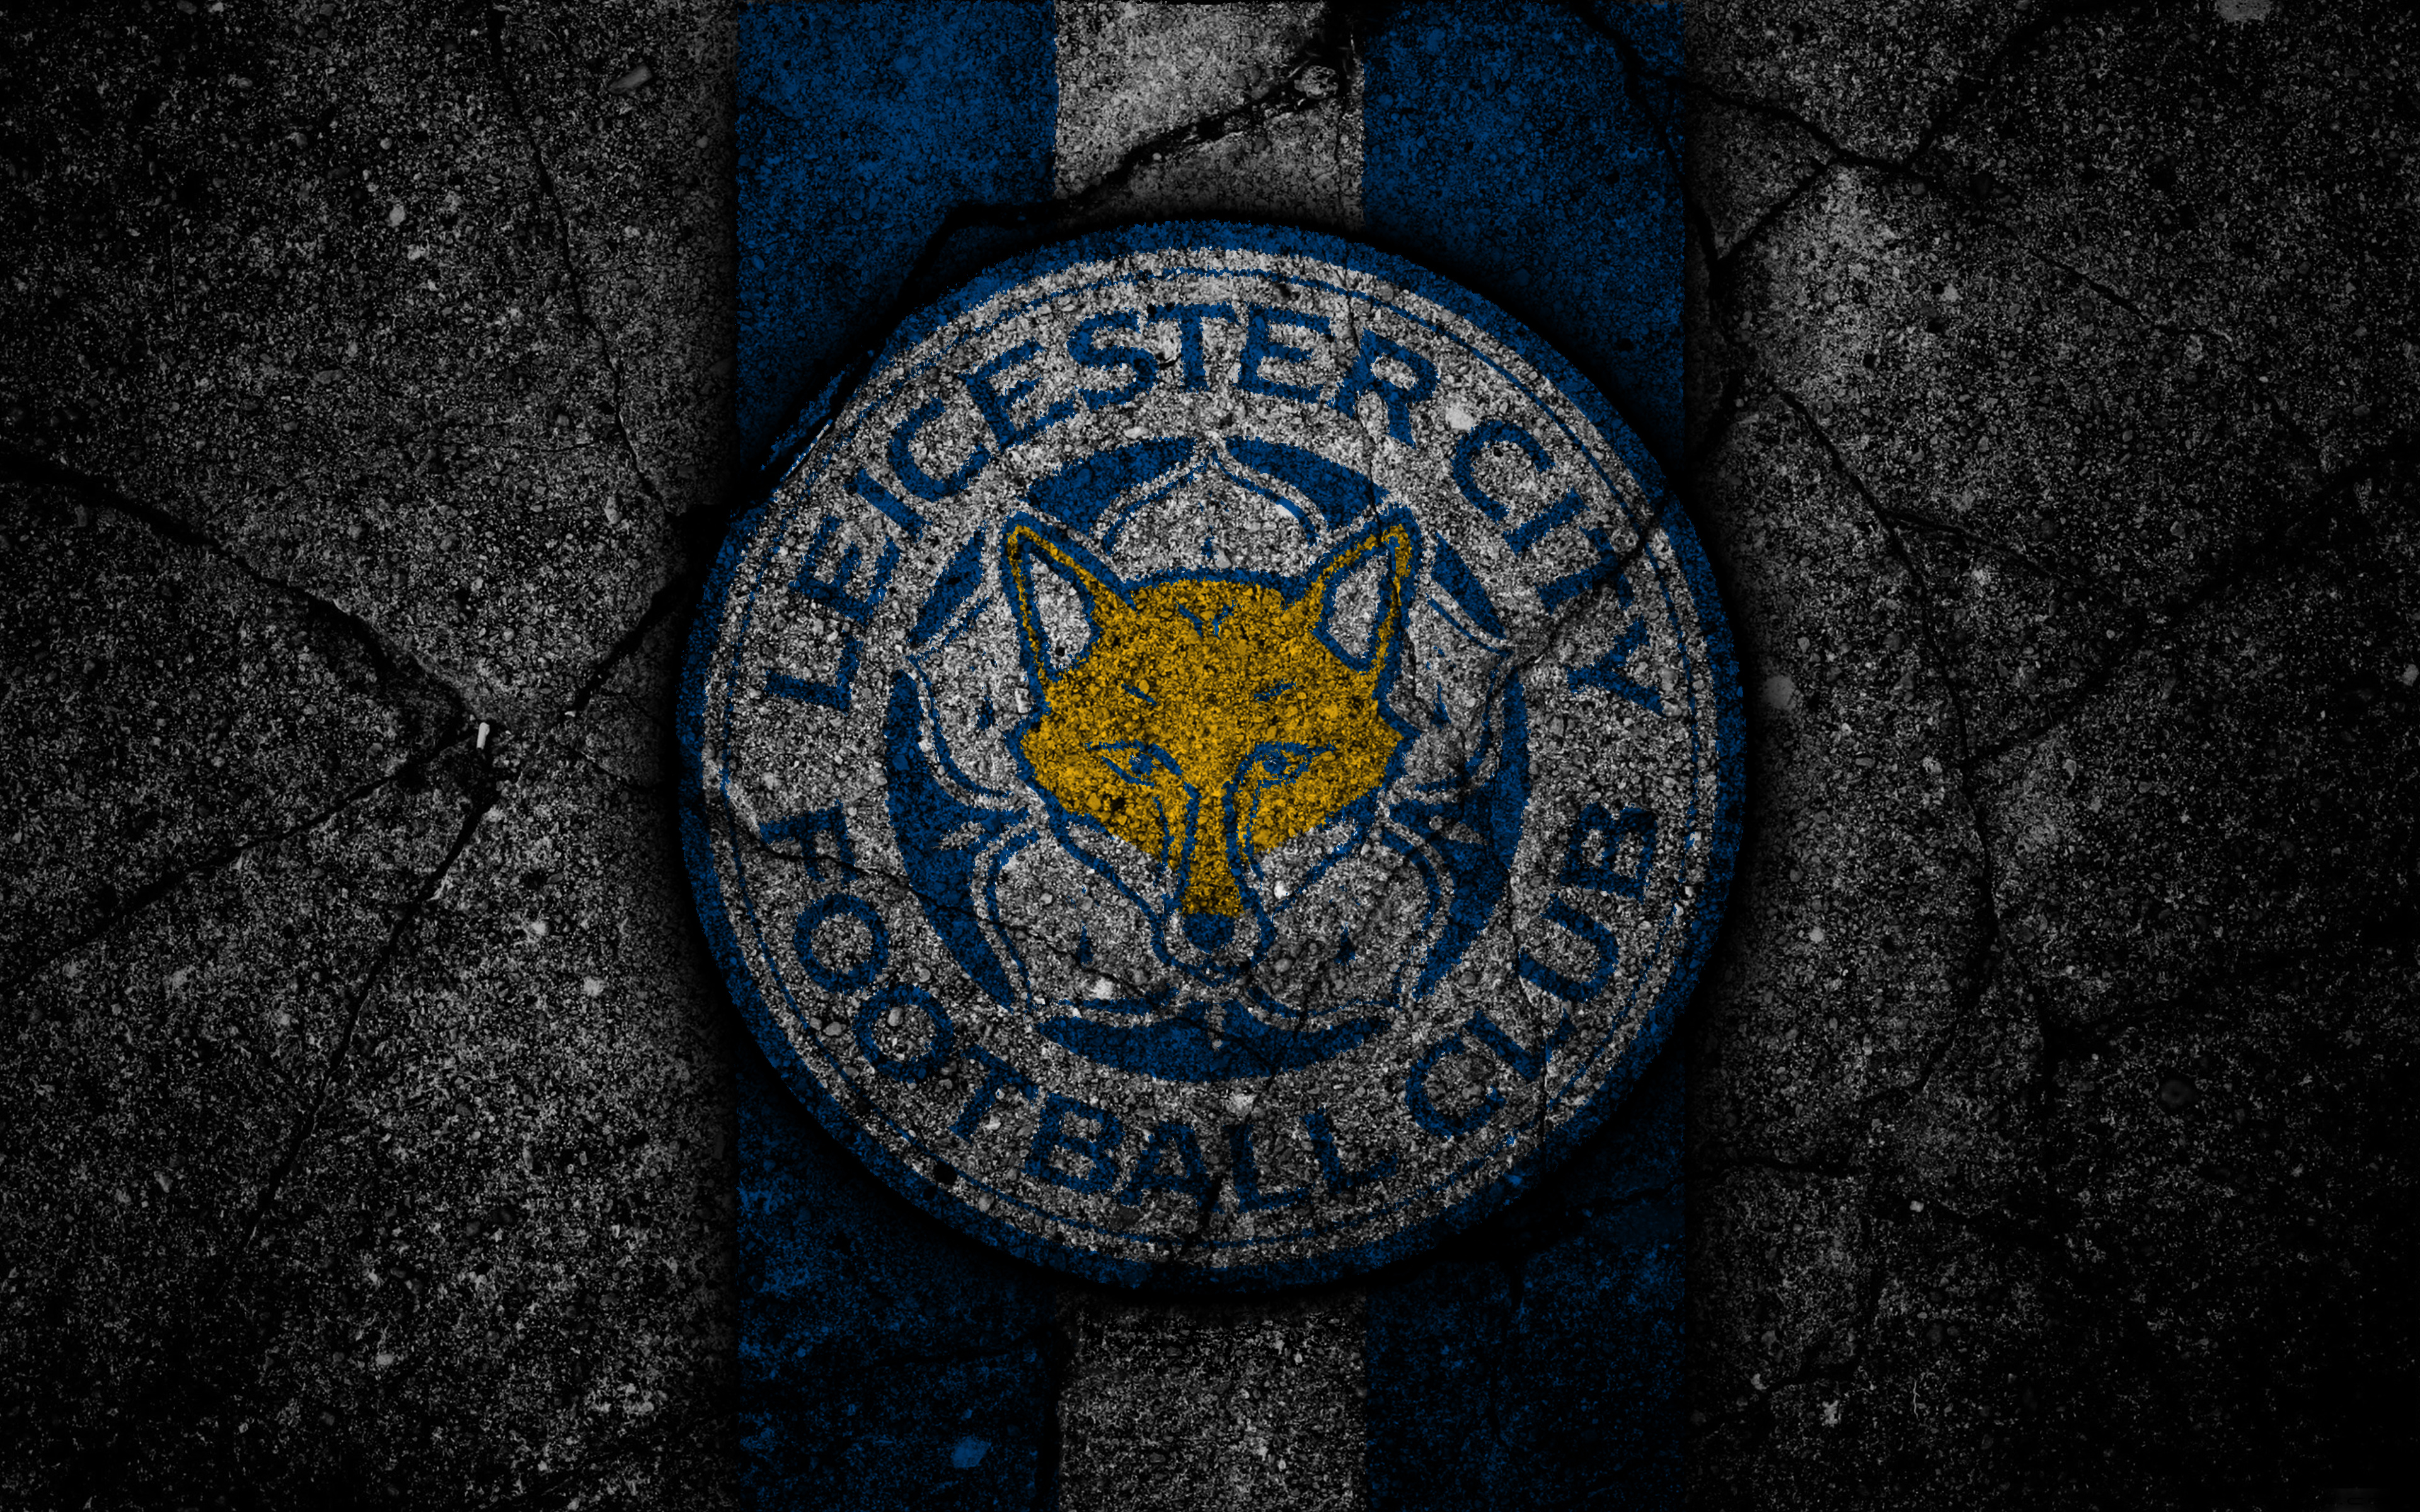 Leicester City Wallpapers